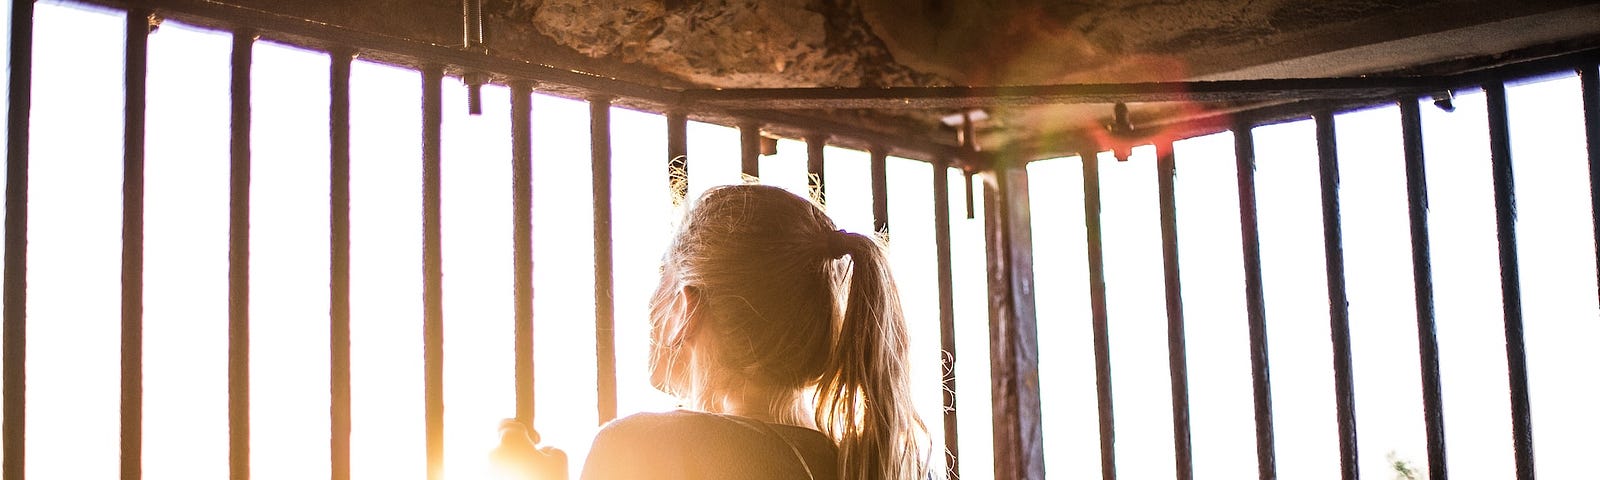 A woman looking at the sun from inside a cage.